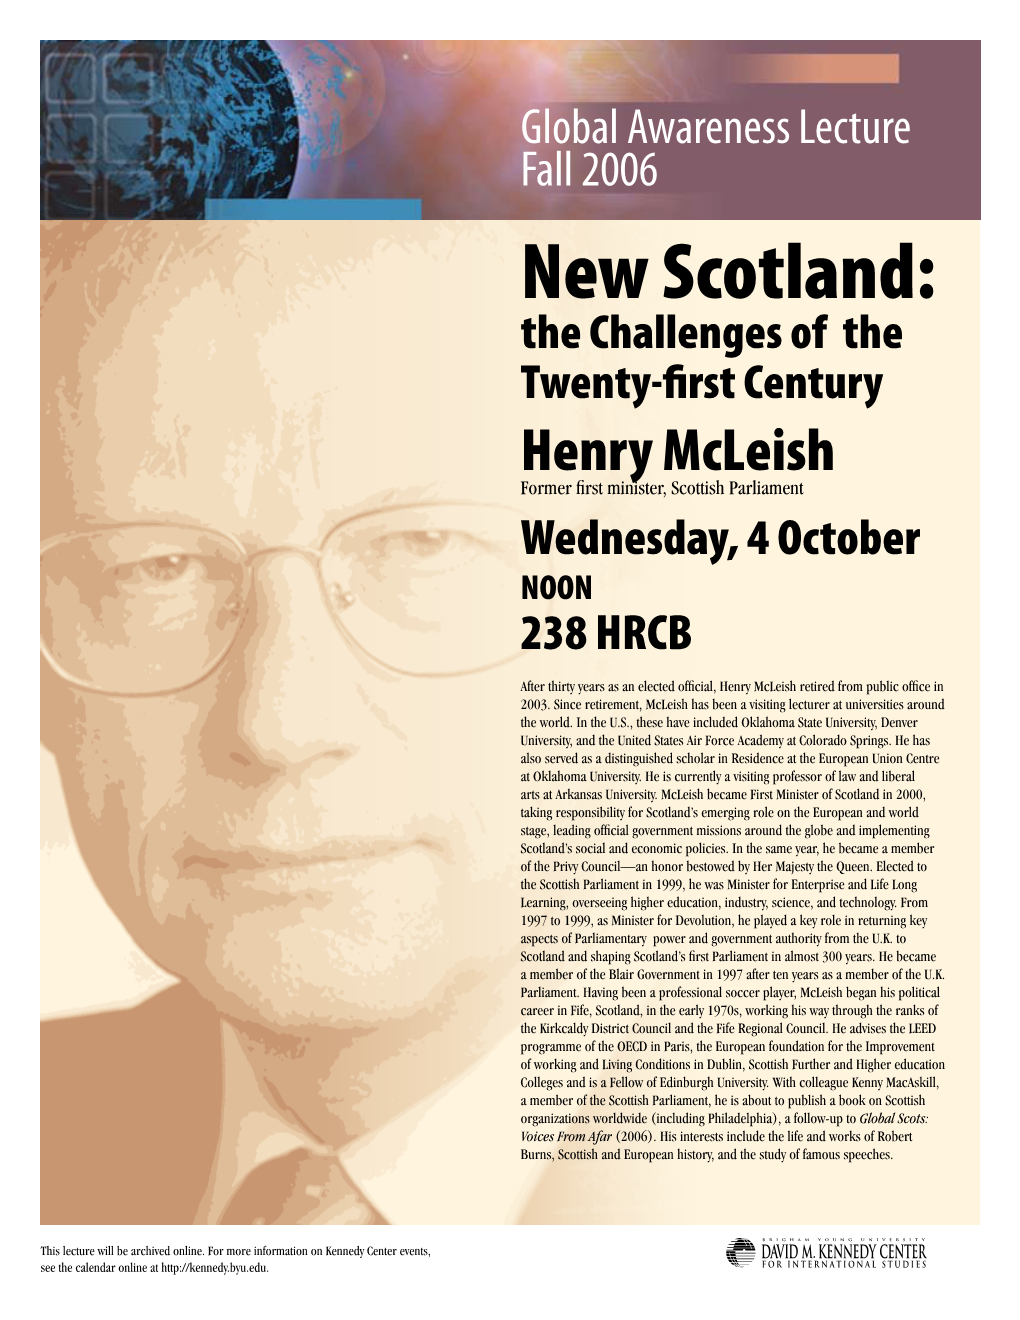 New Scotland: the Challenges of the Twenty-First Century Henry Mcleish Former First Minister, Scottish Parliament Wednesday, 4 October Noon 238 HRCB